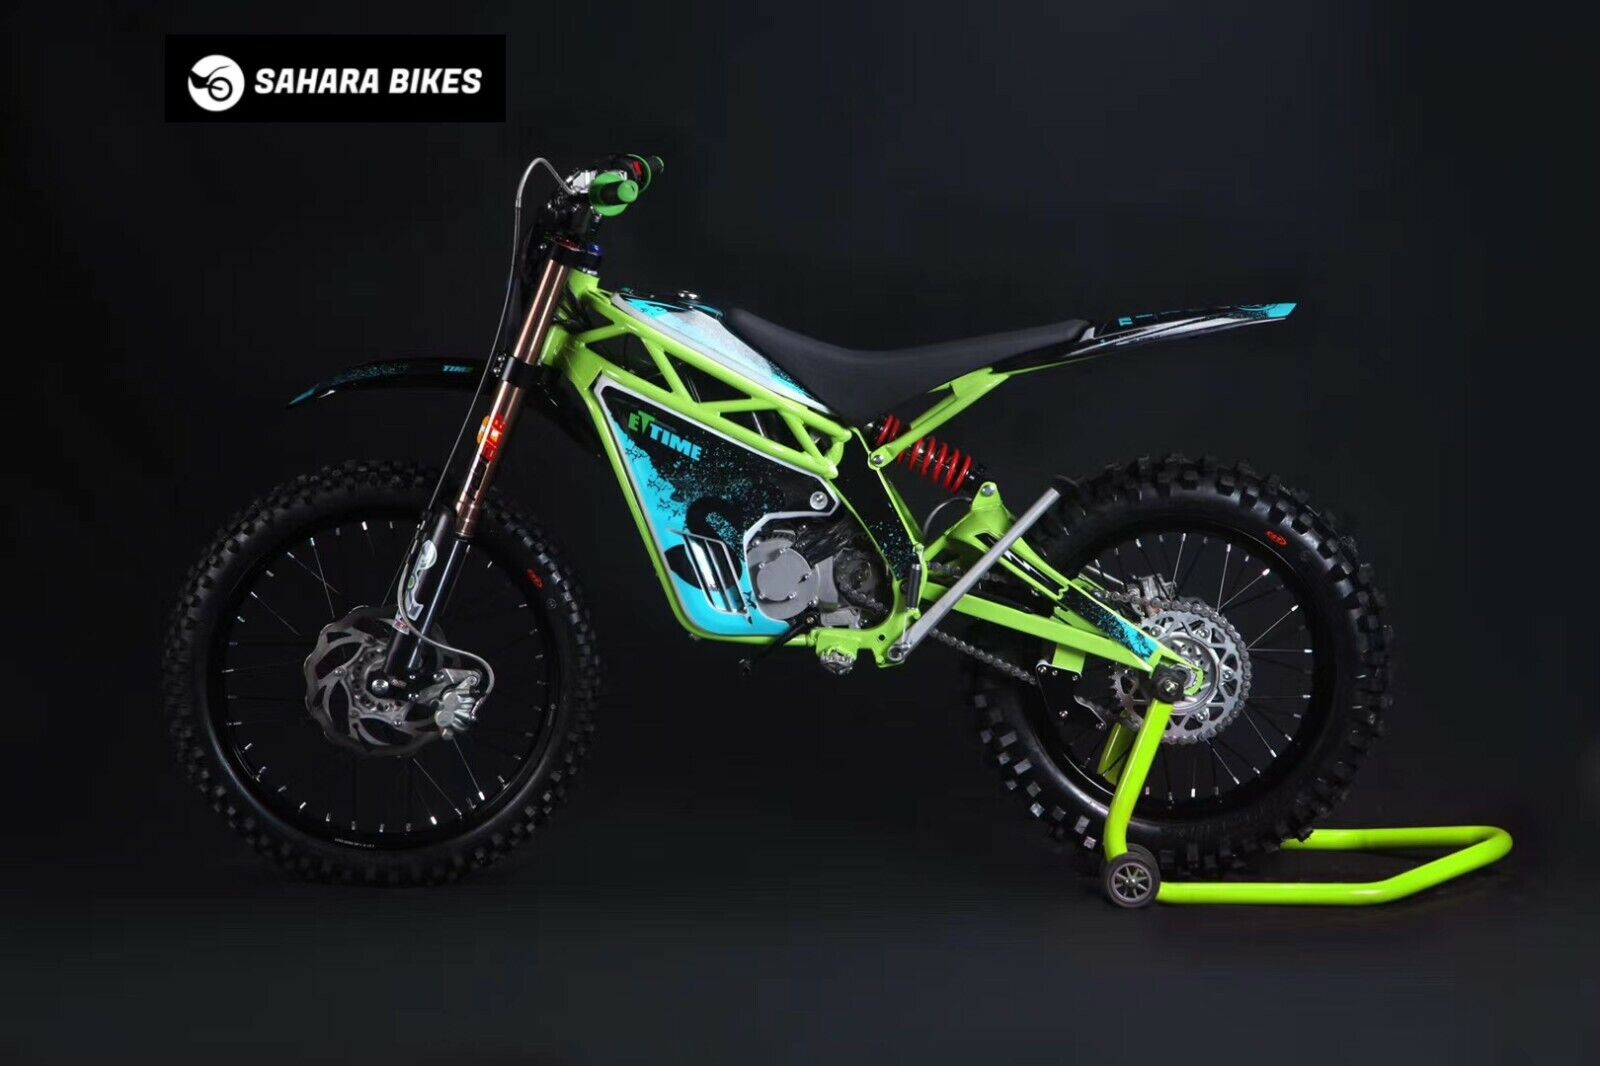 72V 40A Electric Off-Road (ET) Motocross Motorcycle